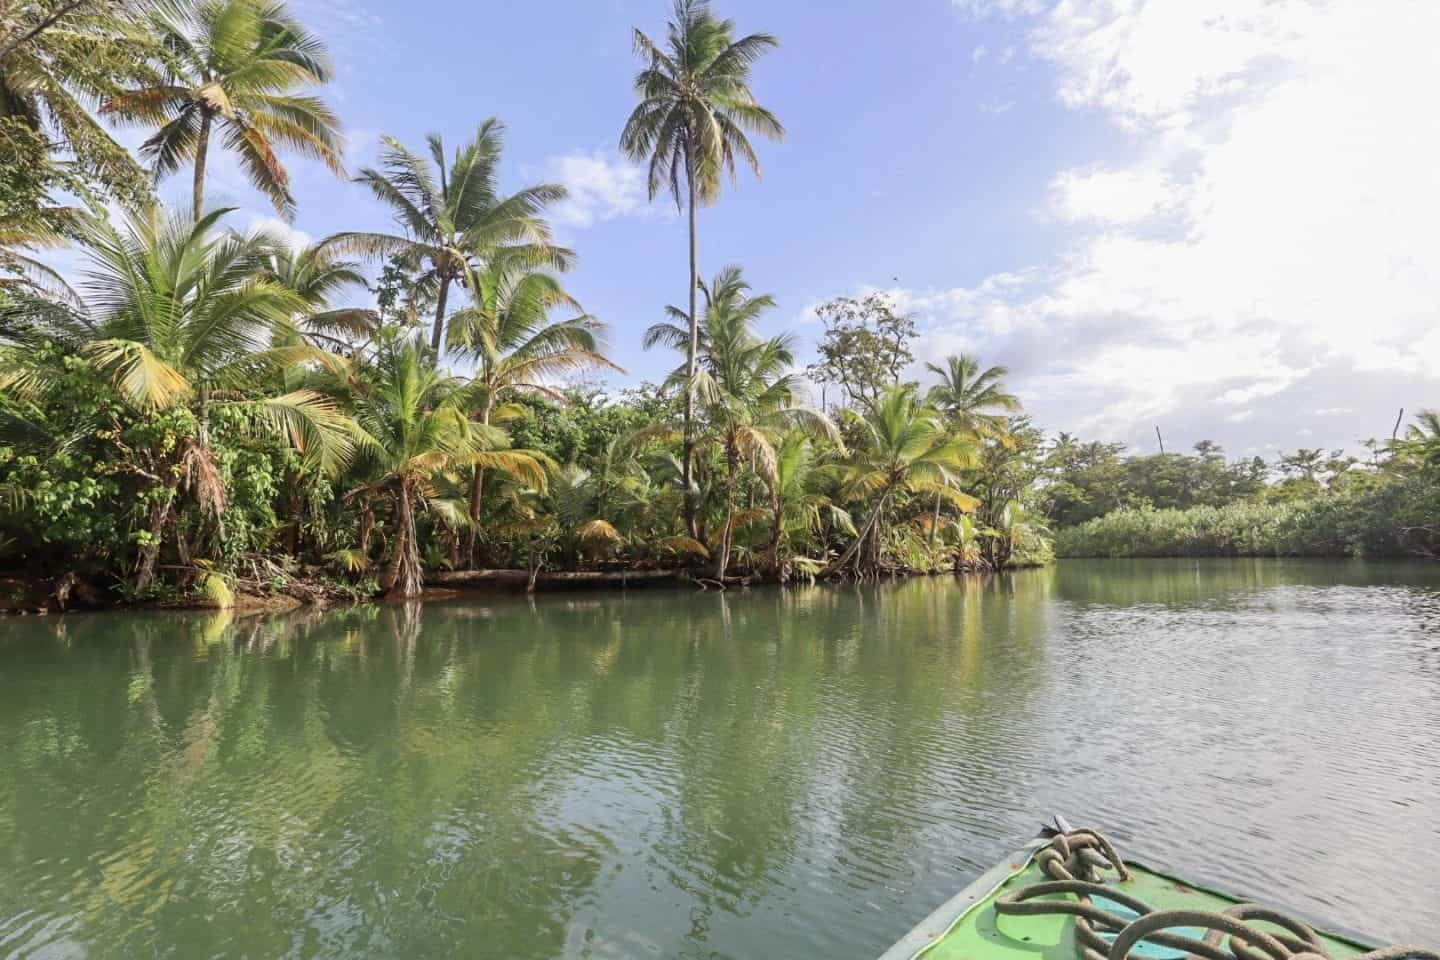 dominica day tours, indian river boat tour with palm trees dominica 